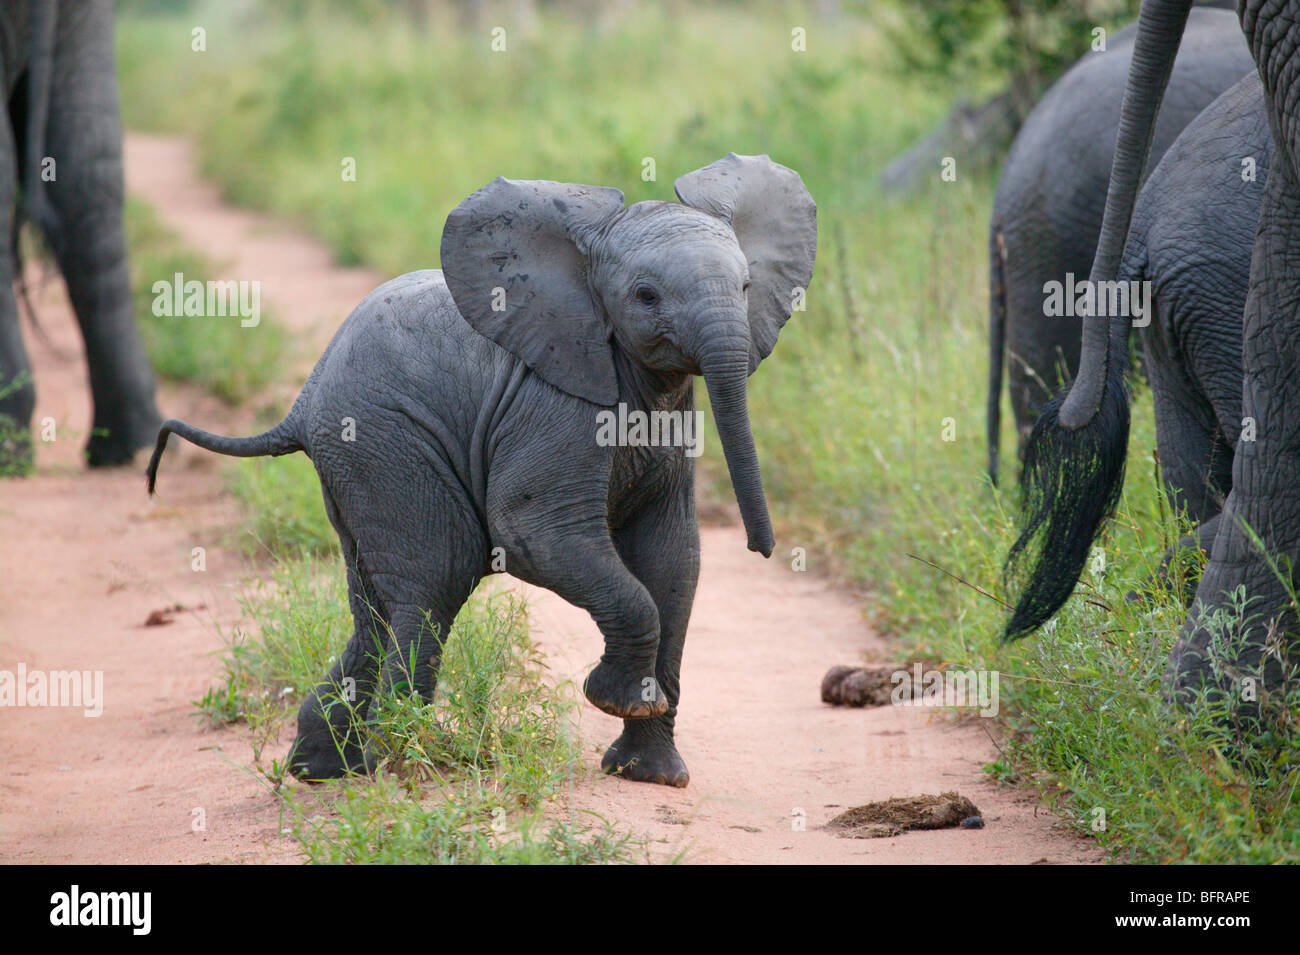 Young elephant calf with an attitude, foot and head raised Stock Photo